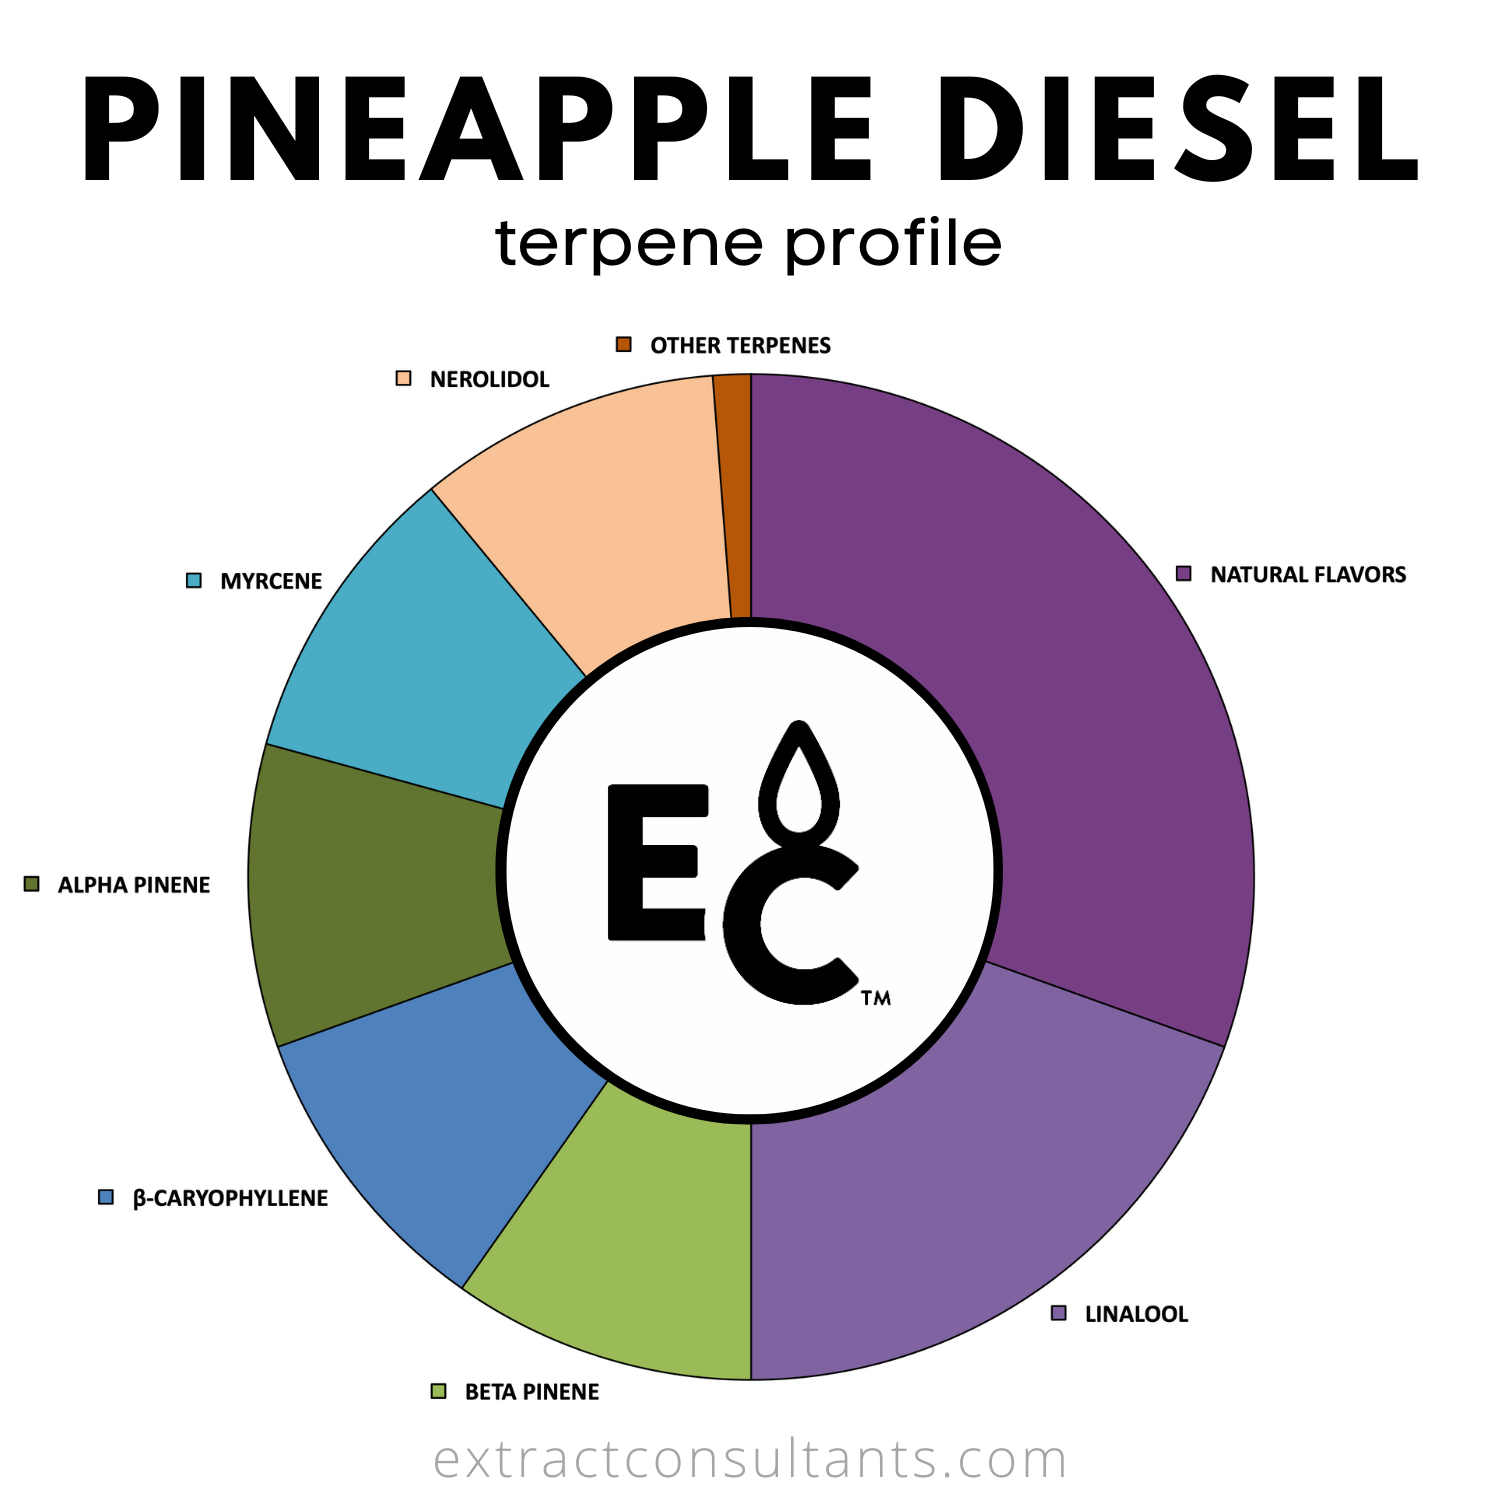 Pineapple Kush Terpenes (Solvent Free) // Extract Consultants